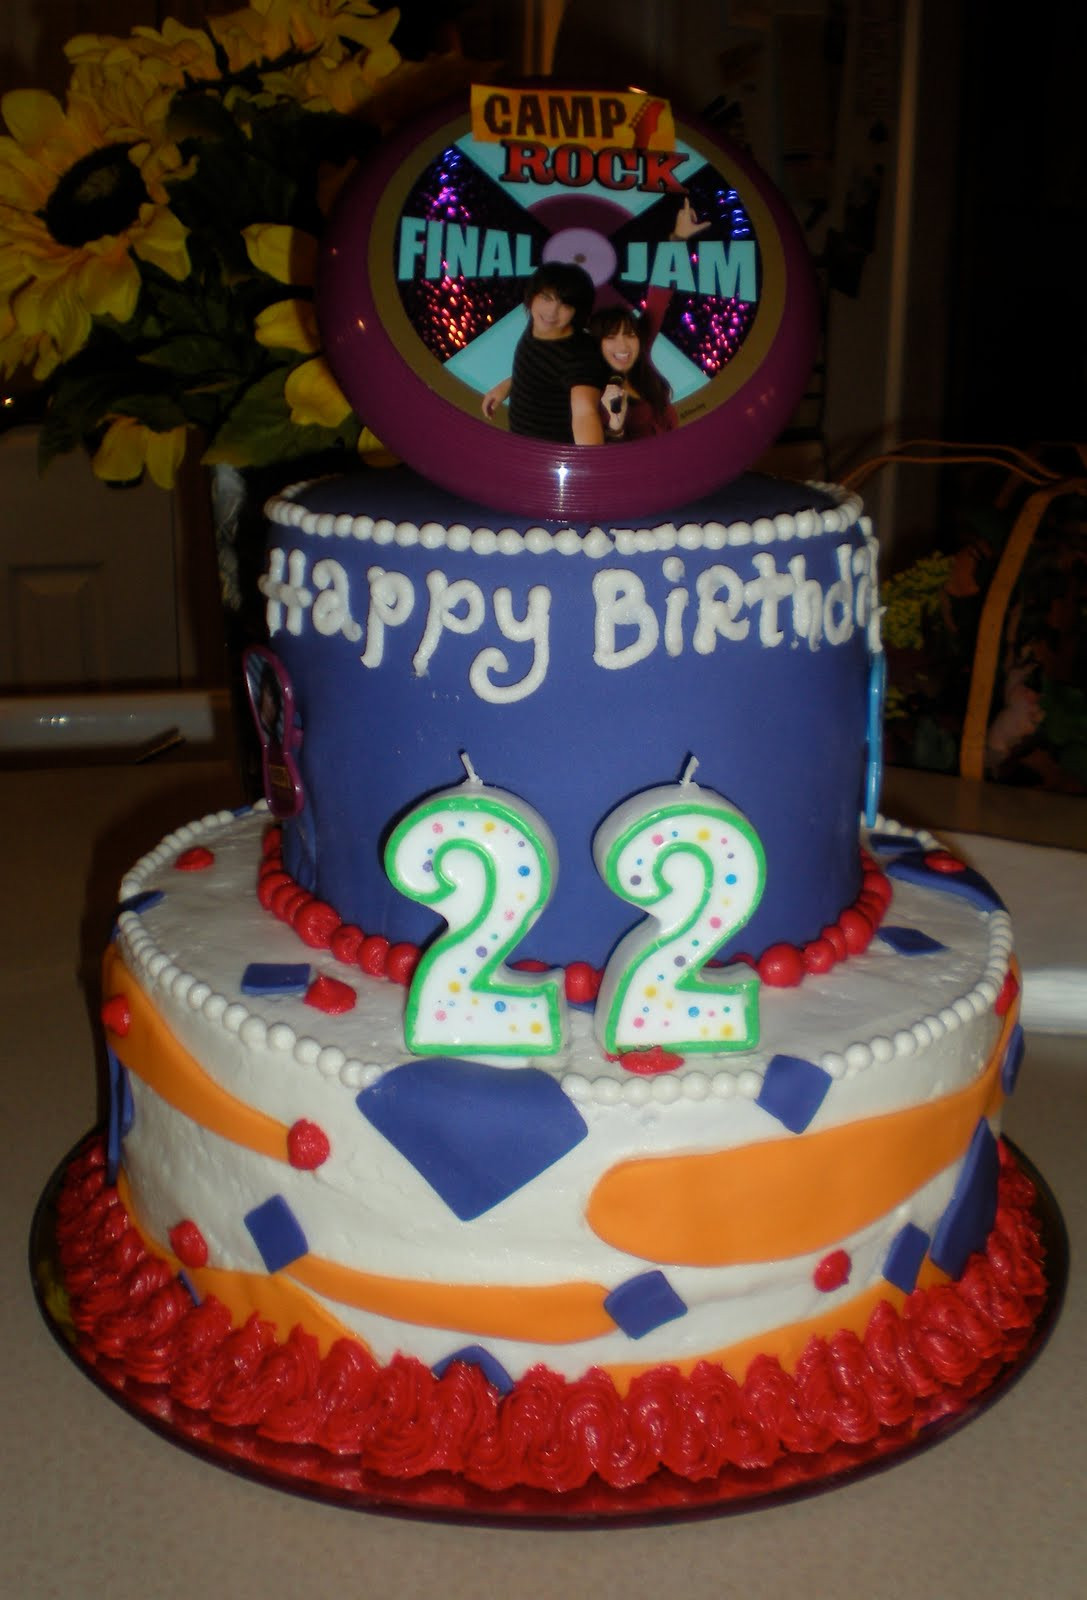 22nd Birthday Cake
 Chandelier Cakes by Natalie Peterson NATIONAL HOLIDAY